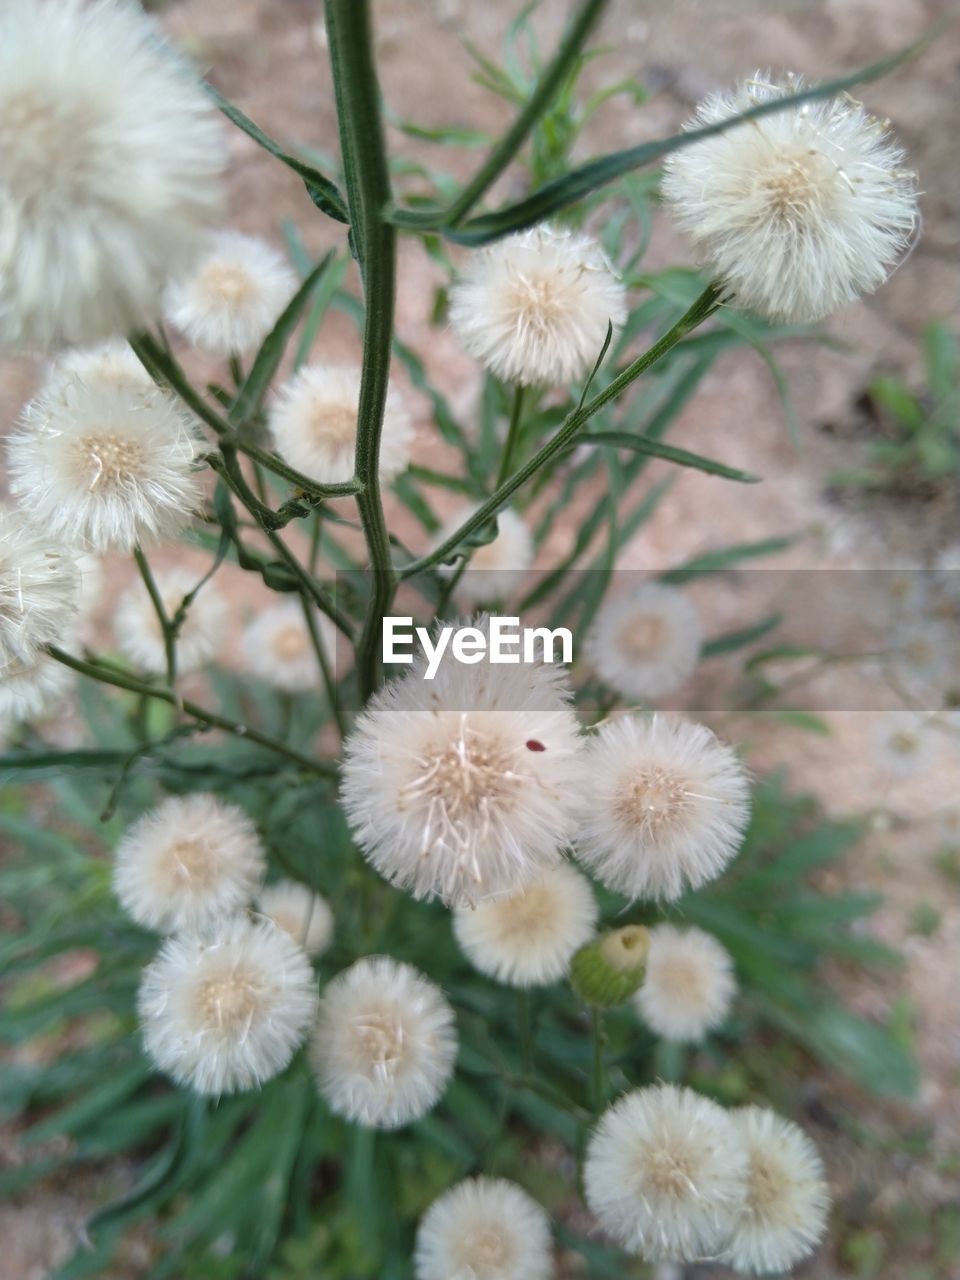 plant, flower, flowering plant, freshness, beauty in nature, fragility, nature, growth, close-up, no people, inflorescence, flower head, white, focus on foreground, day, dandelion, outdoors, wildflower, springtime, botany, blossom, land, high angle view